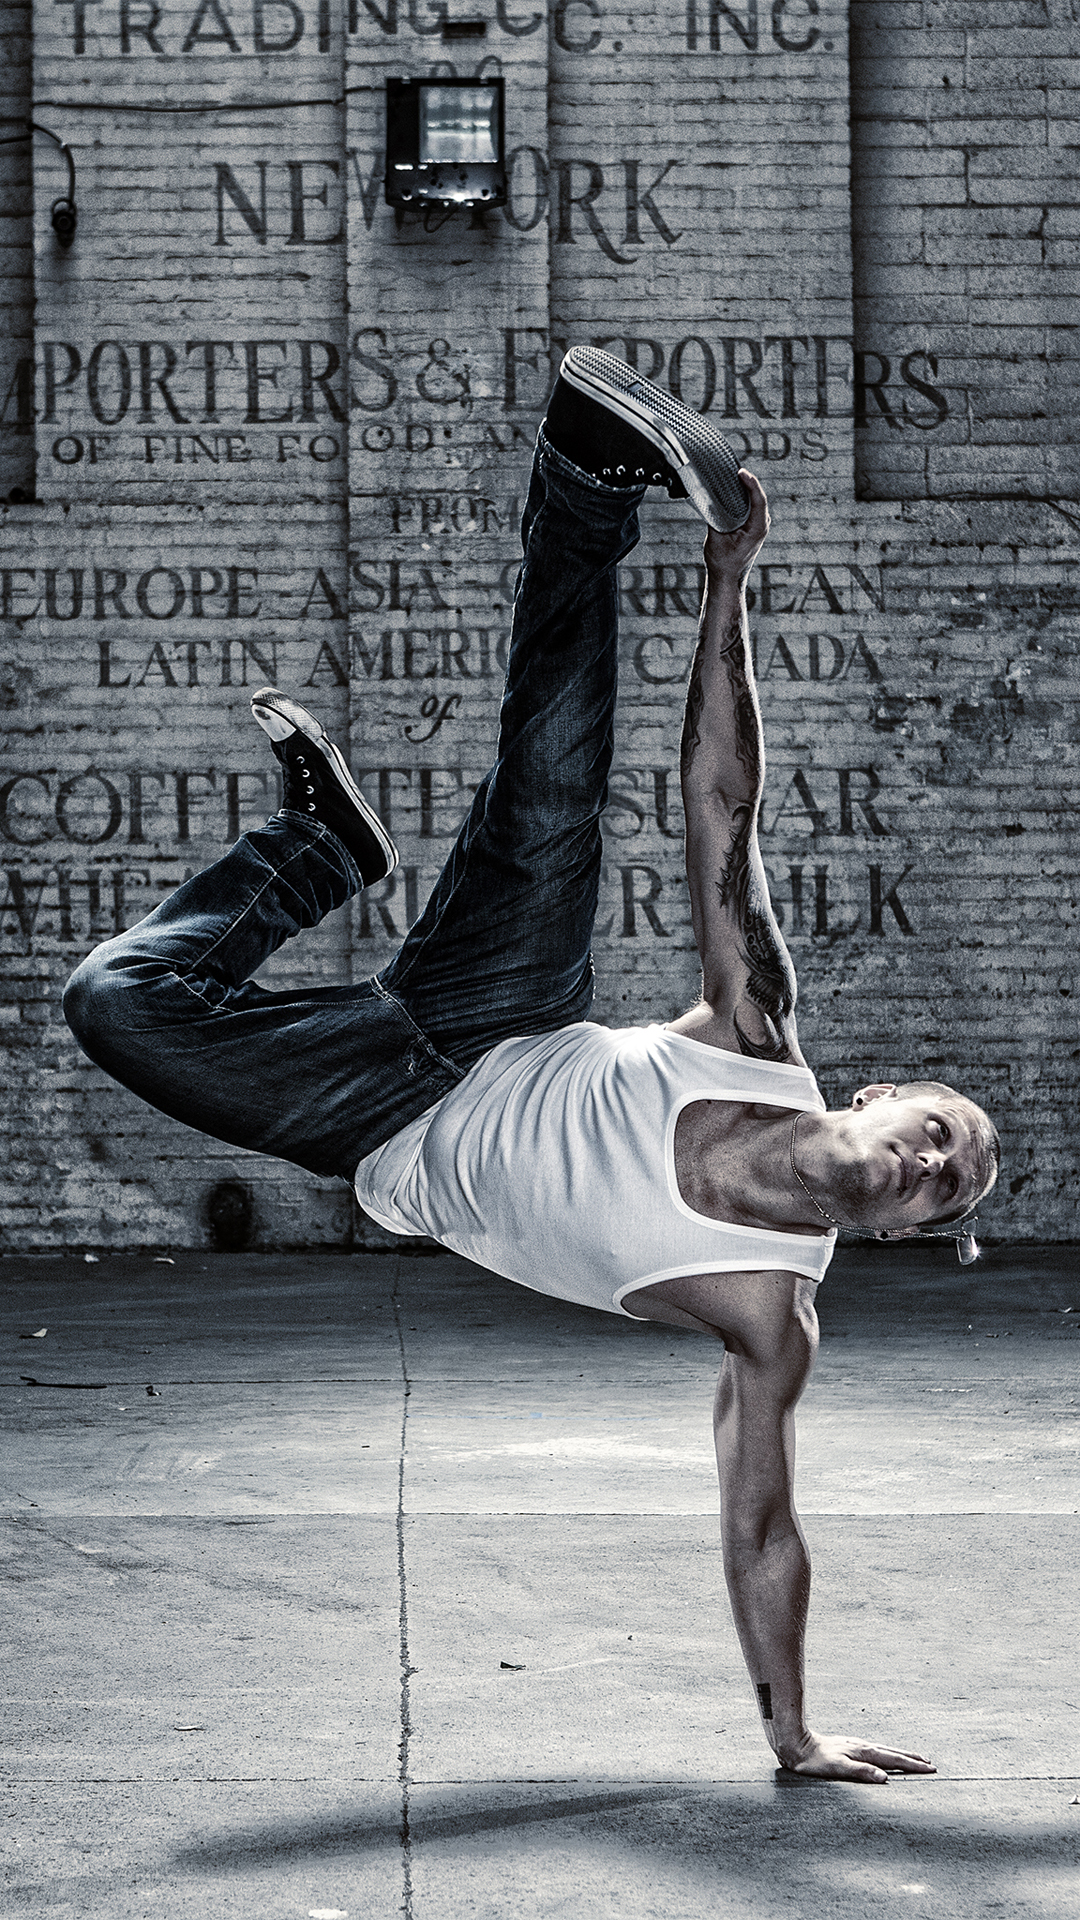 A man doing a one-handed handstand in front of a brick wall. - Dance